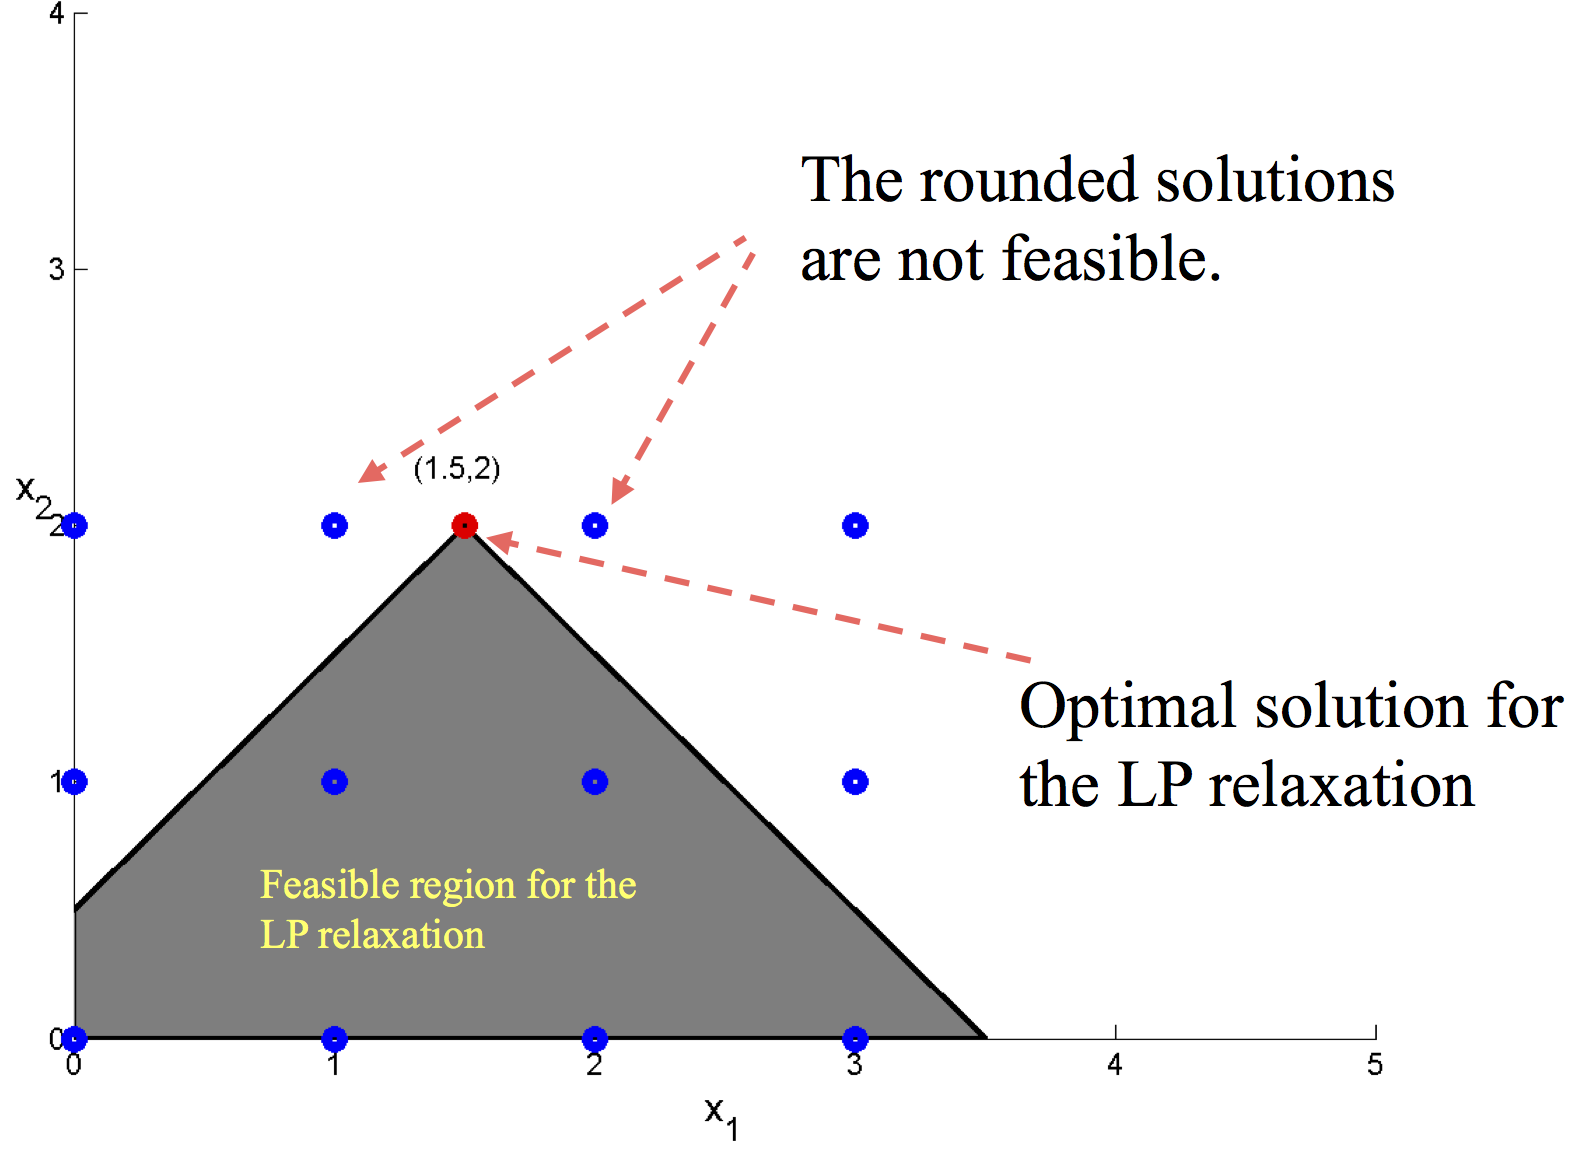 A drawback of rounding LP
relaxation solutions